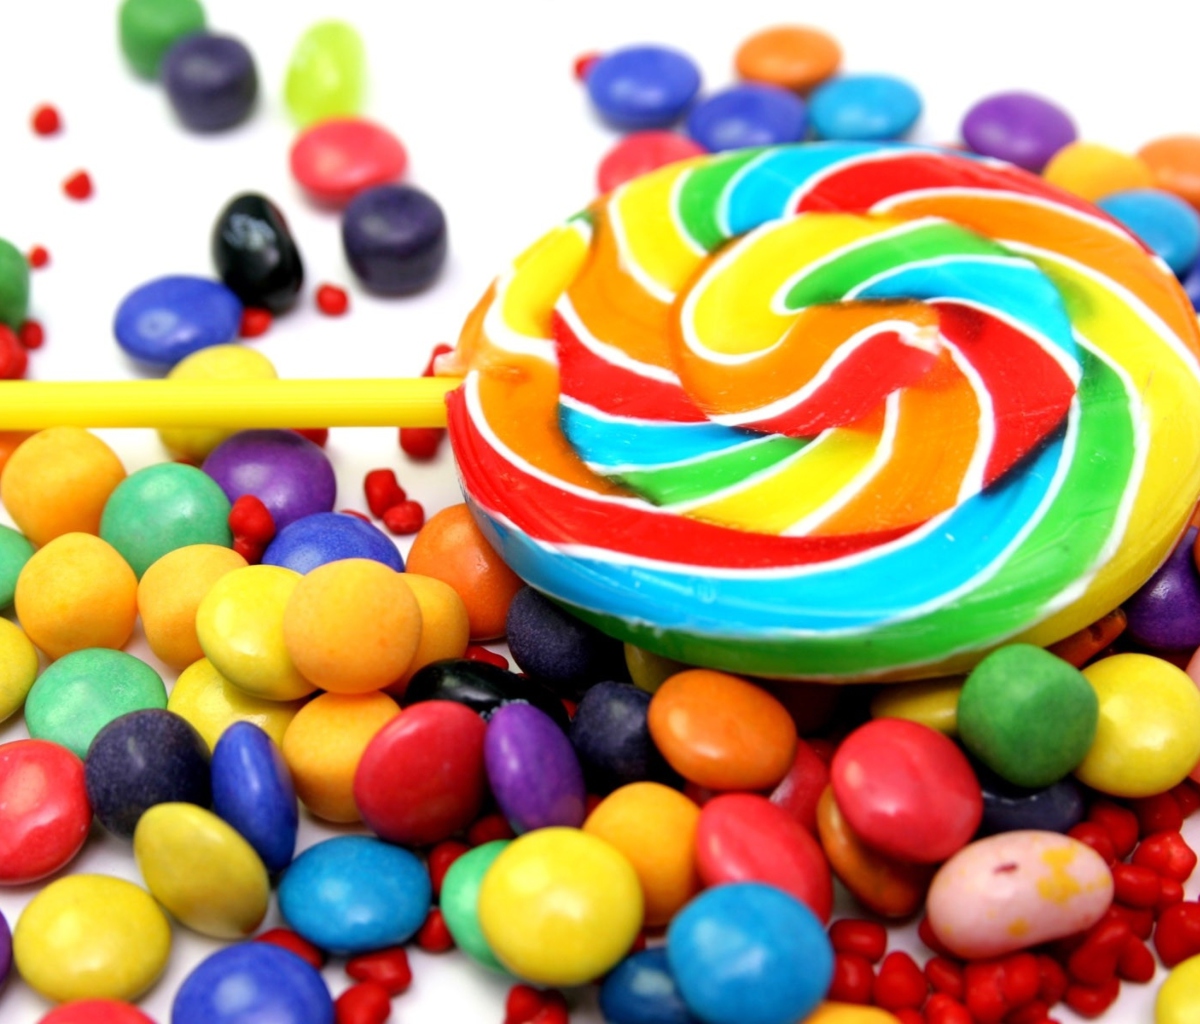 Colorful Candies wallpaper 1200x1024